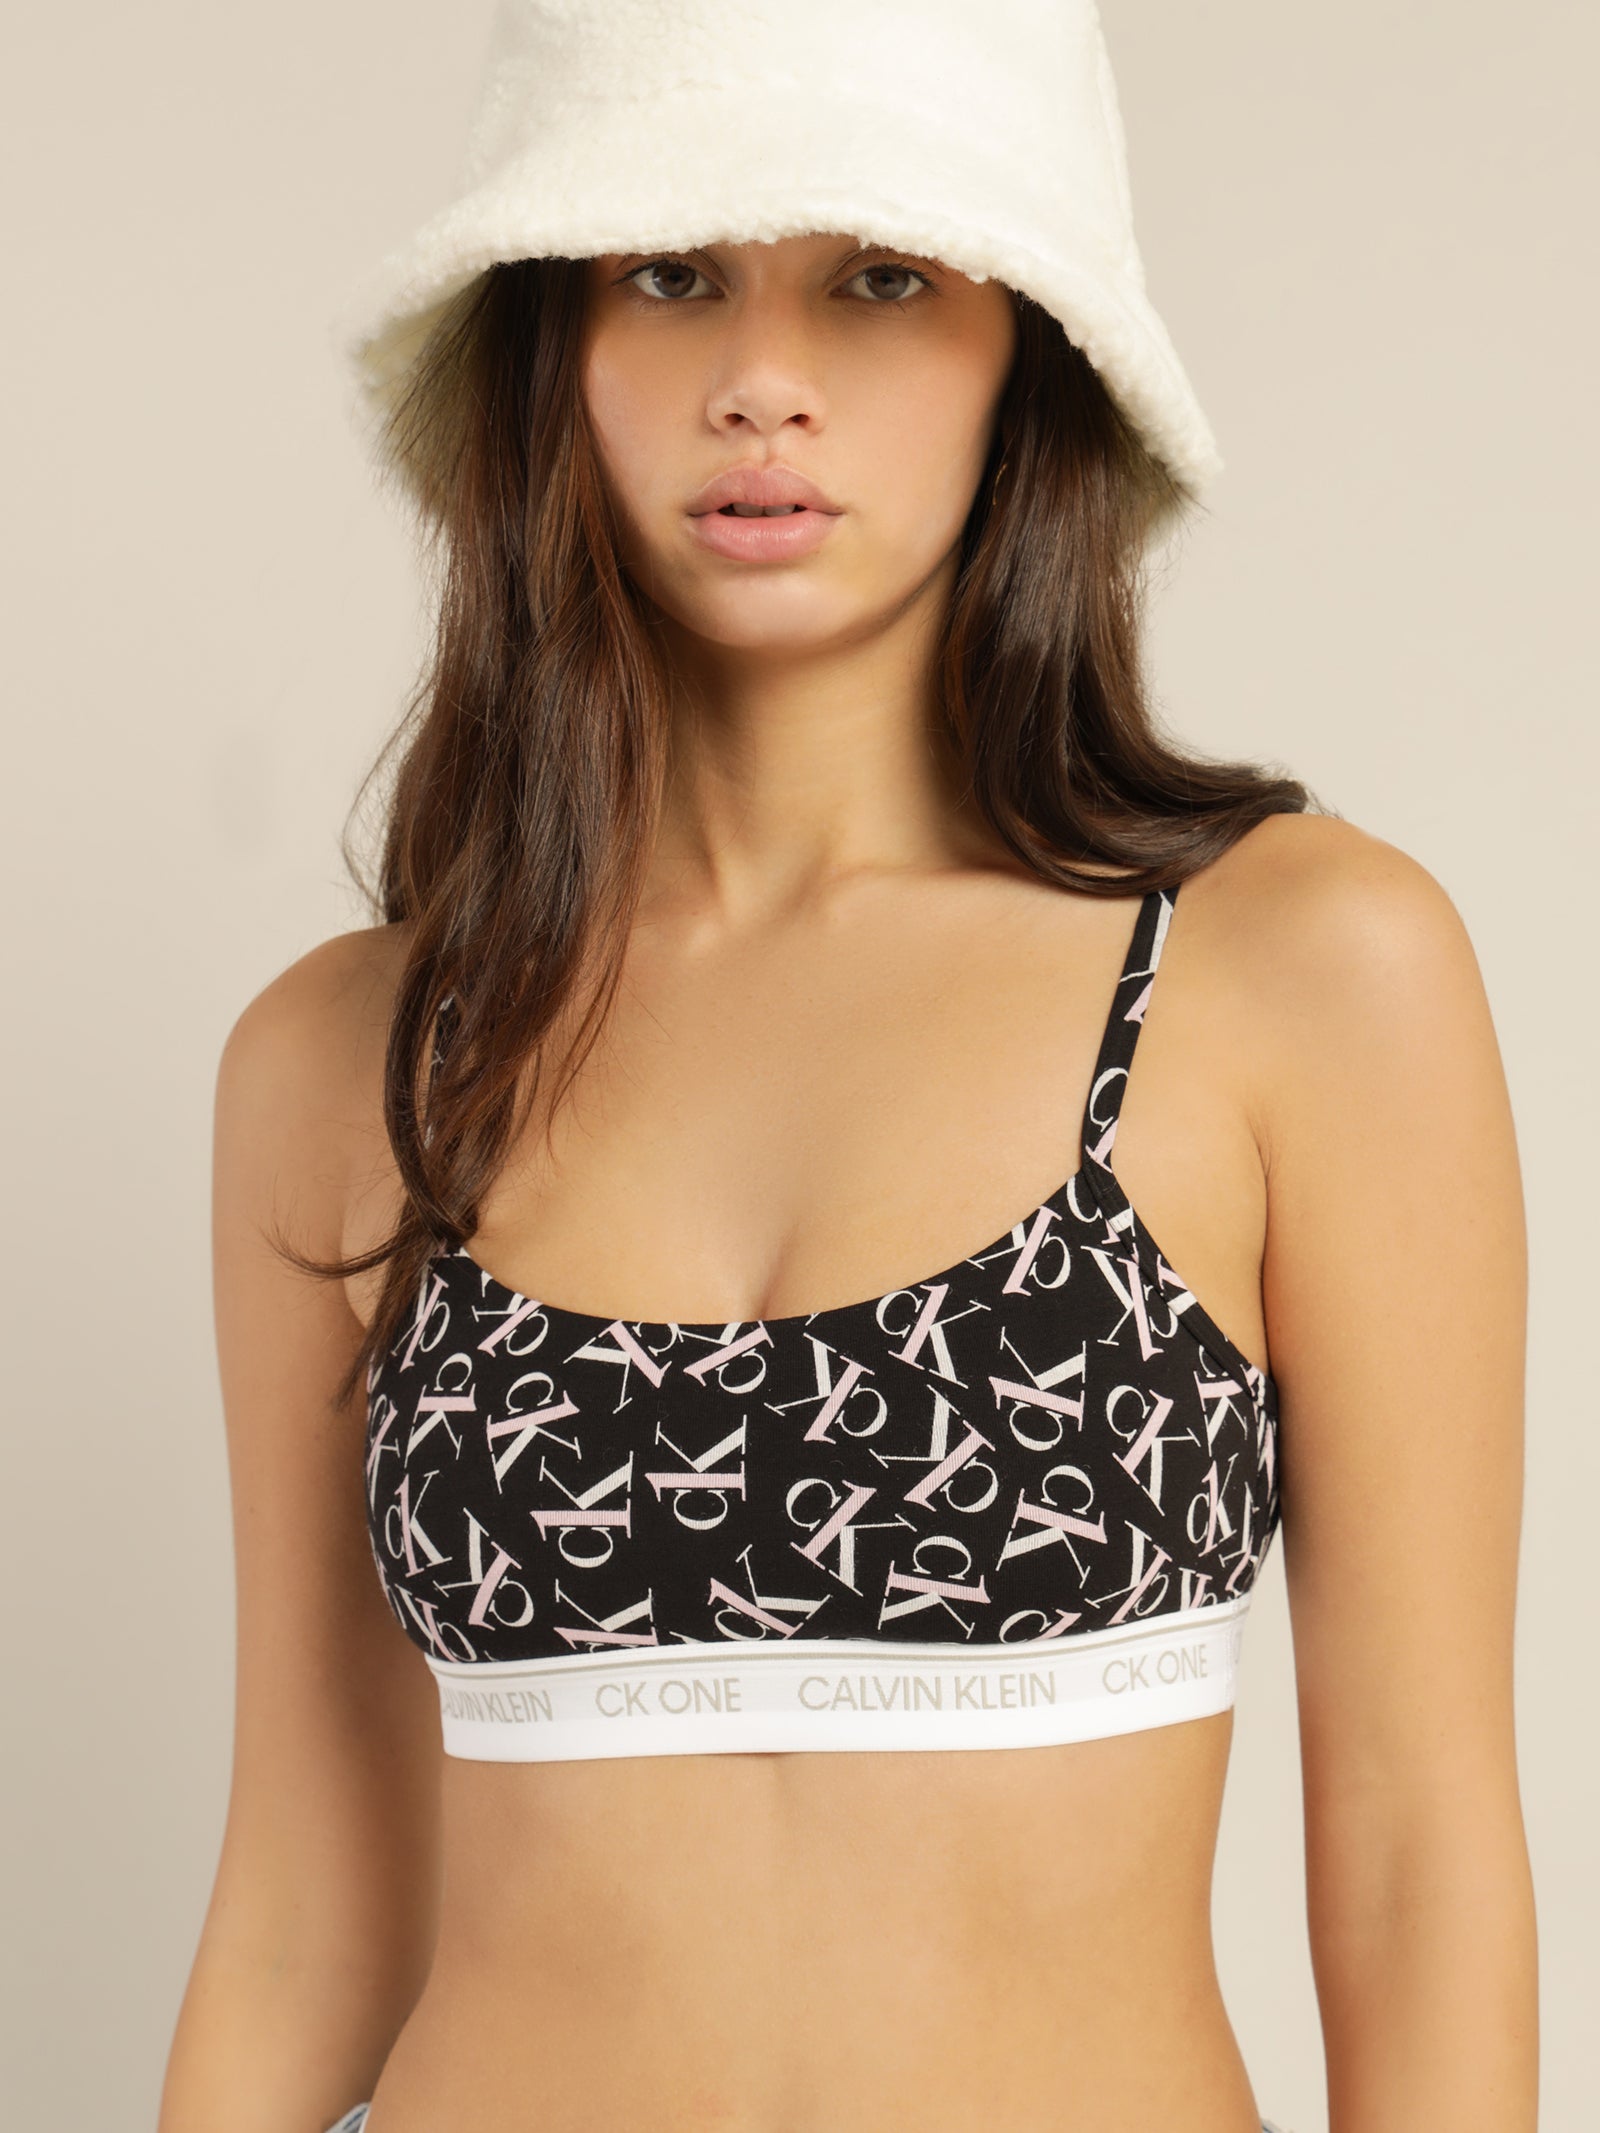 CK One Cotton Unlined Bralette in Black, White & Sand Rose